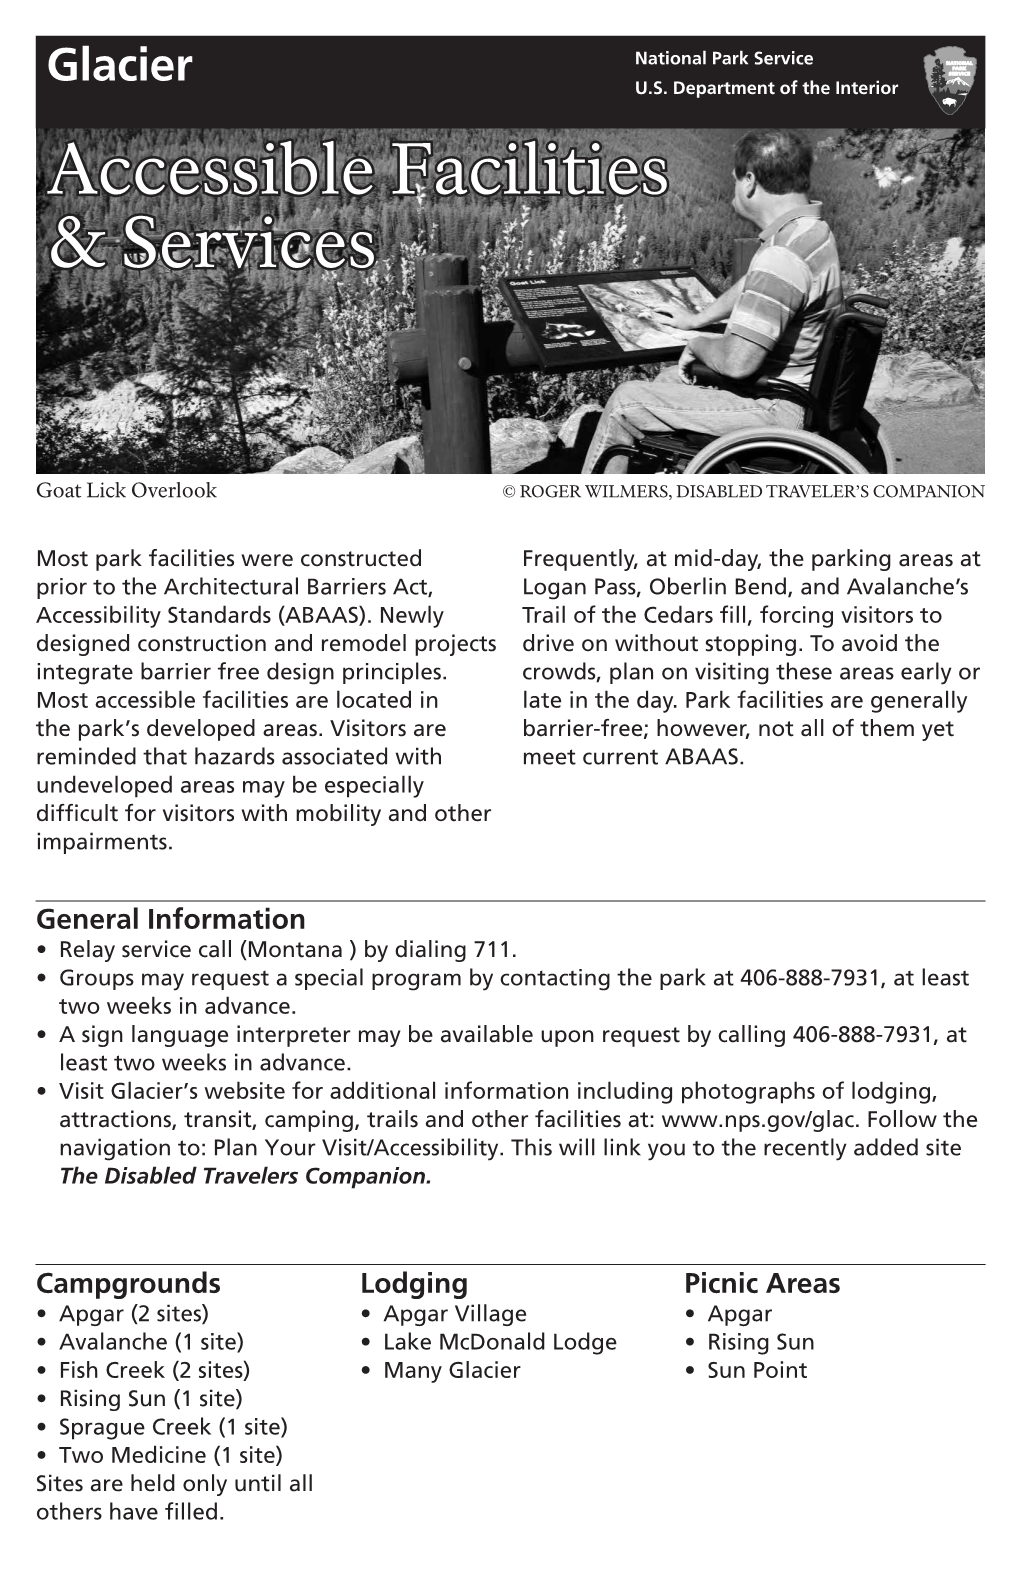 Accessible Facilities & Services